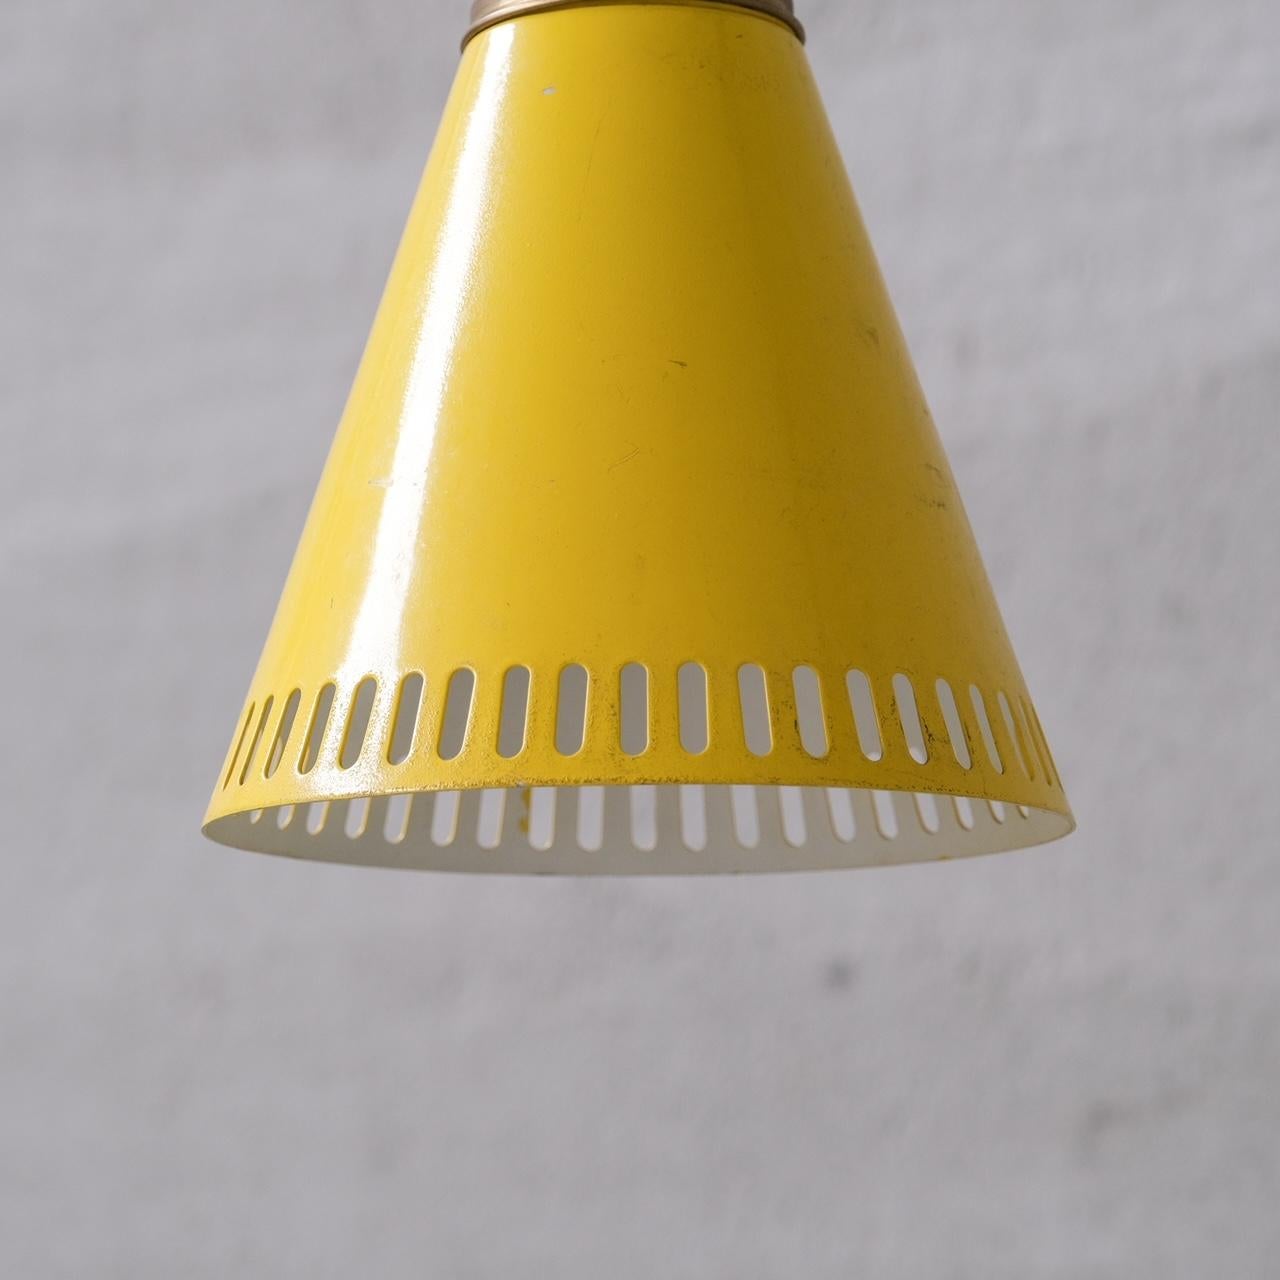 New Old Stock Mid-Century Metal Pendant Shade Lights (6 available) In Good Condition For Sale In London, GB